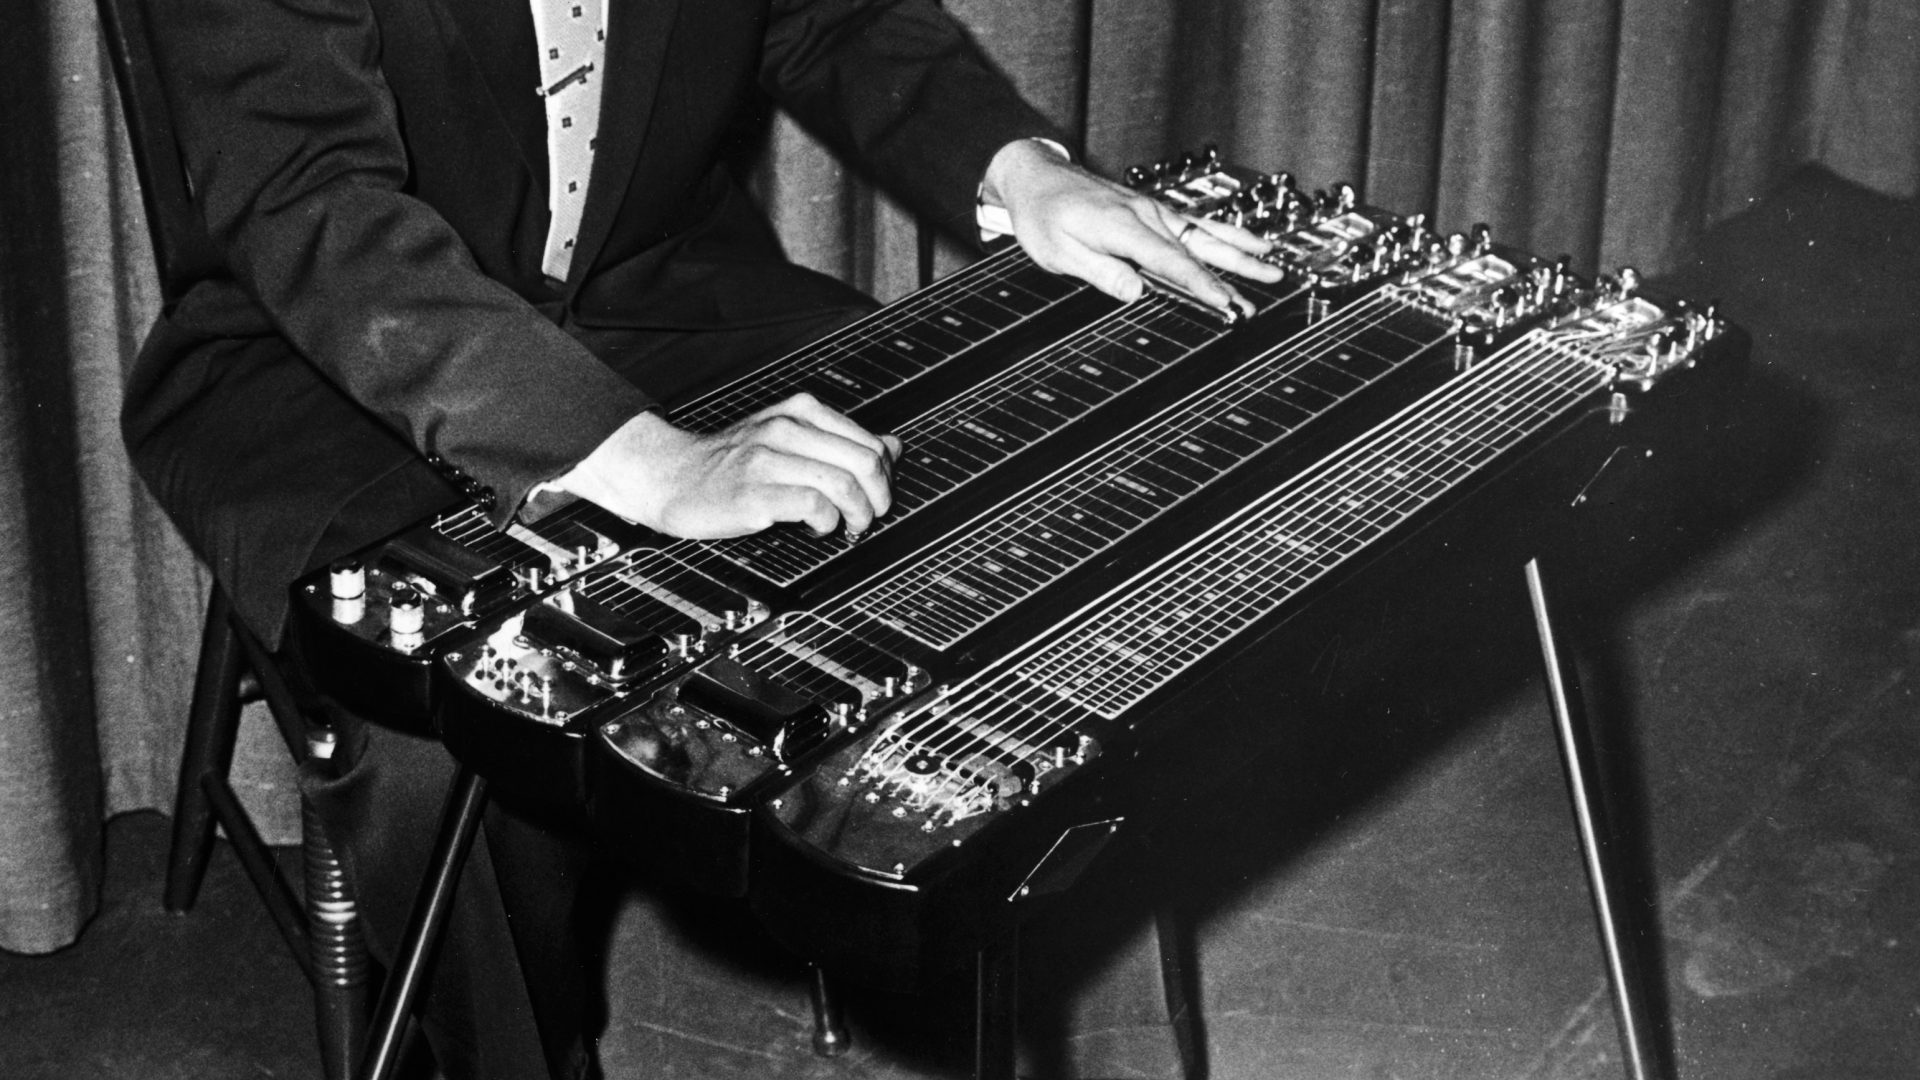 Doblez Me preparé Delgado The endless potential of the pedal steel guitar, an odd duck by any measure  | WITF